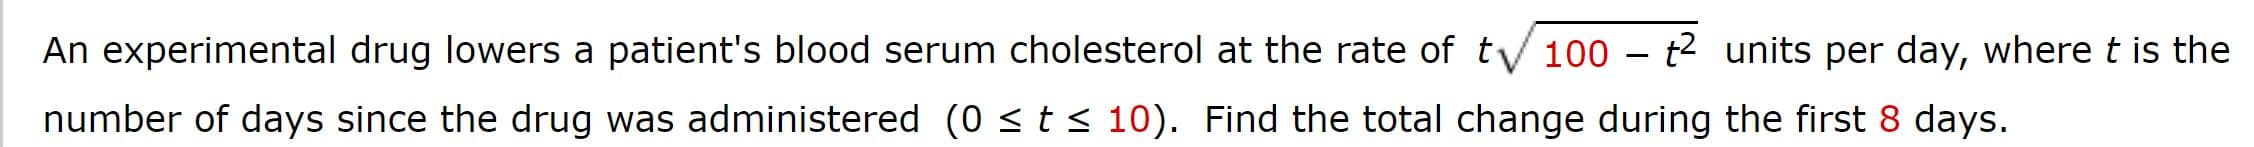 An experimental drug lowers a patient's blood serum cholesterol at the rate of tV 100 - t2 units per day, where t is the
number of days since the drug was administered (0 s t
10). Find the total change during the first 8 days.
